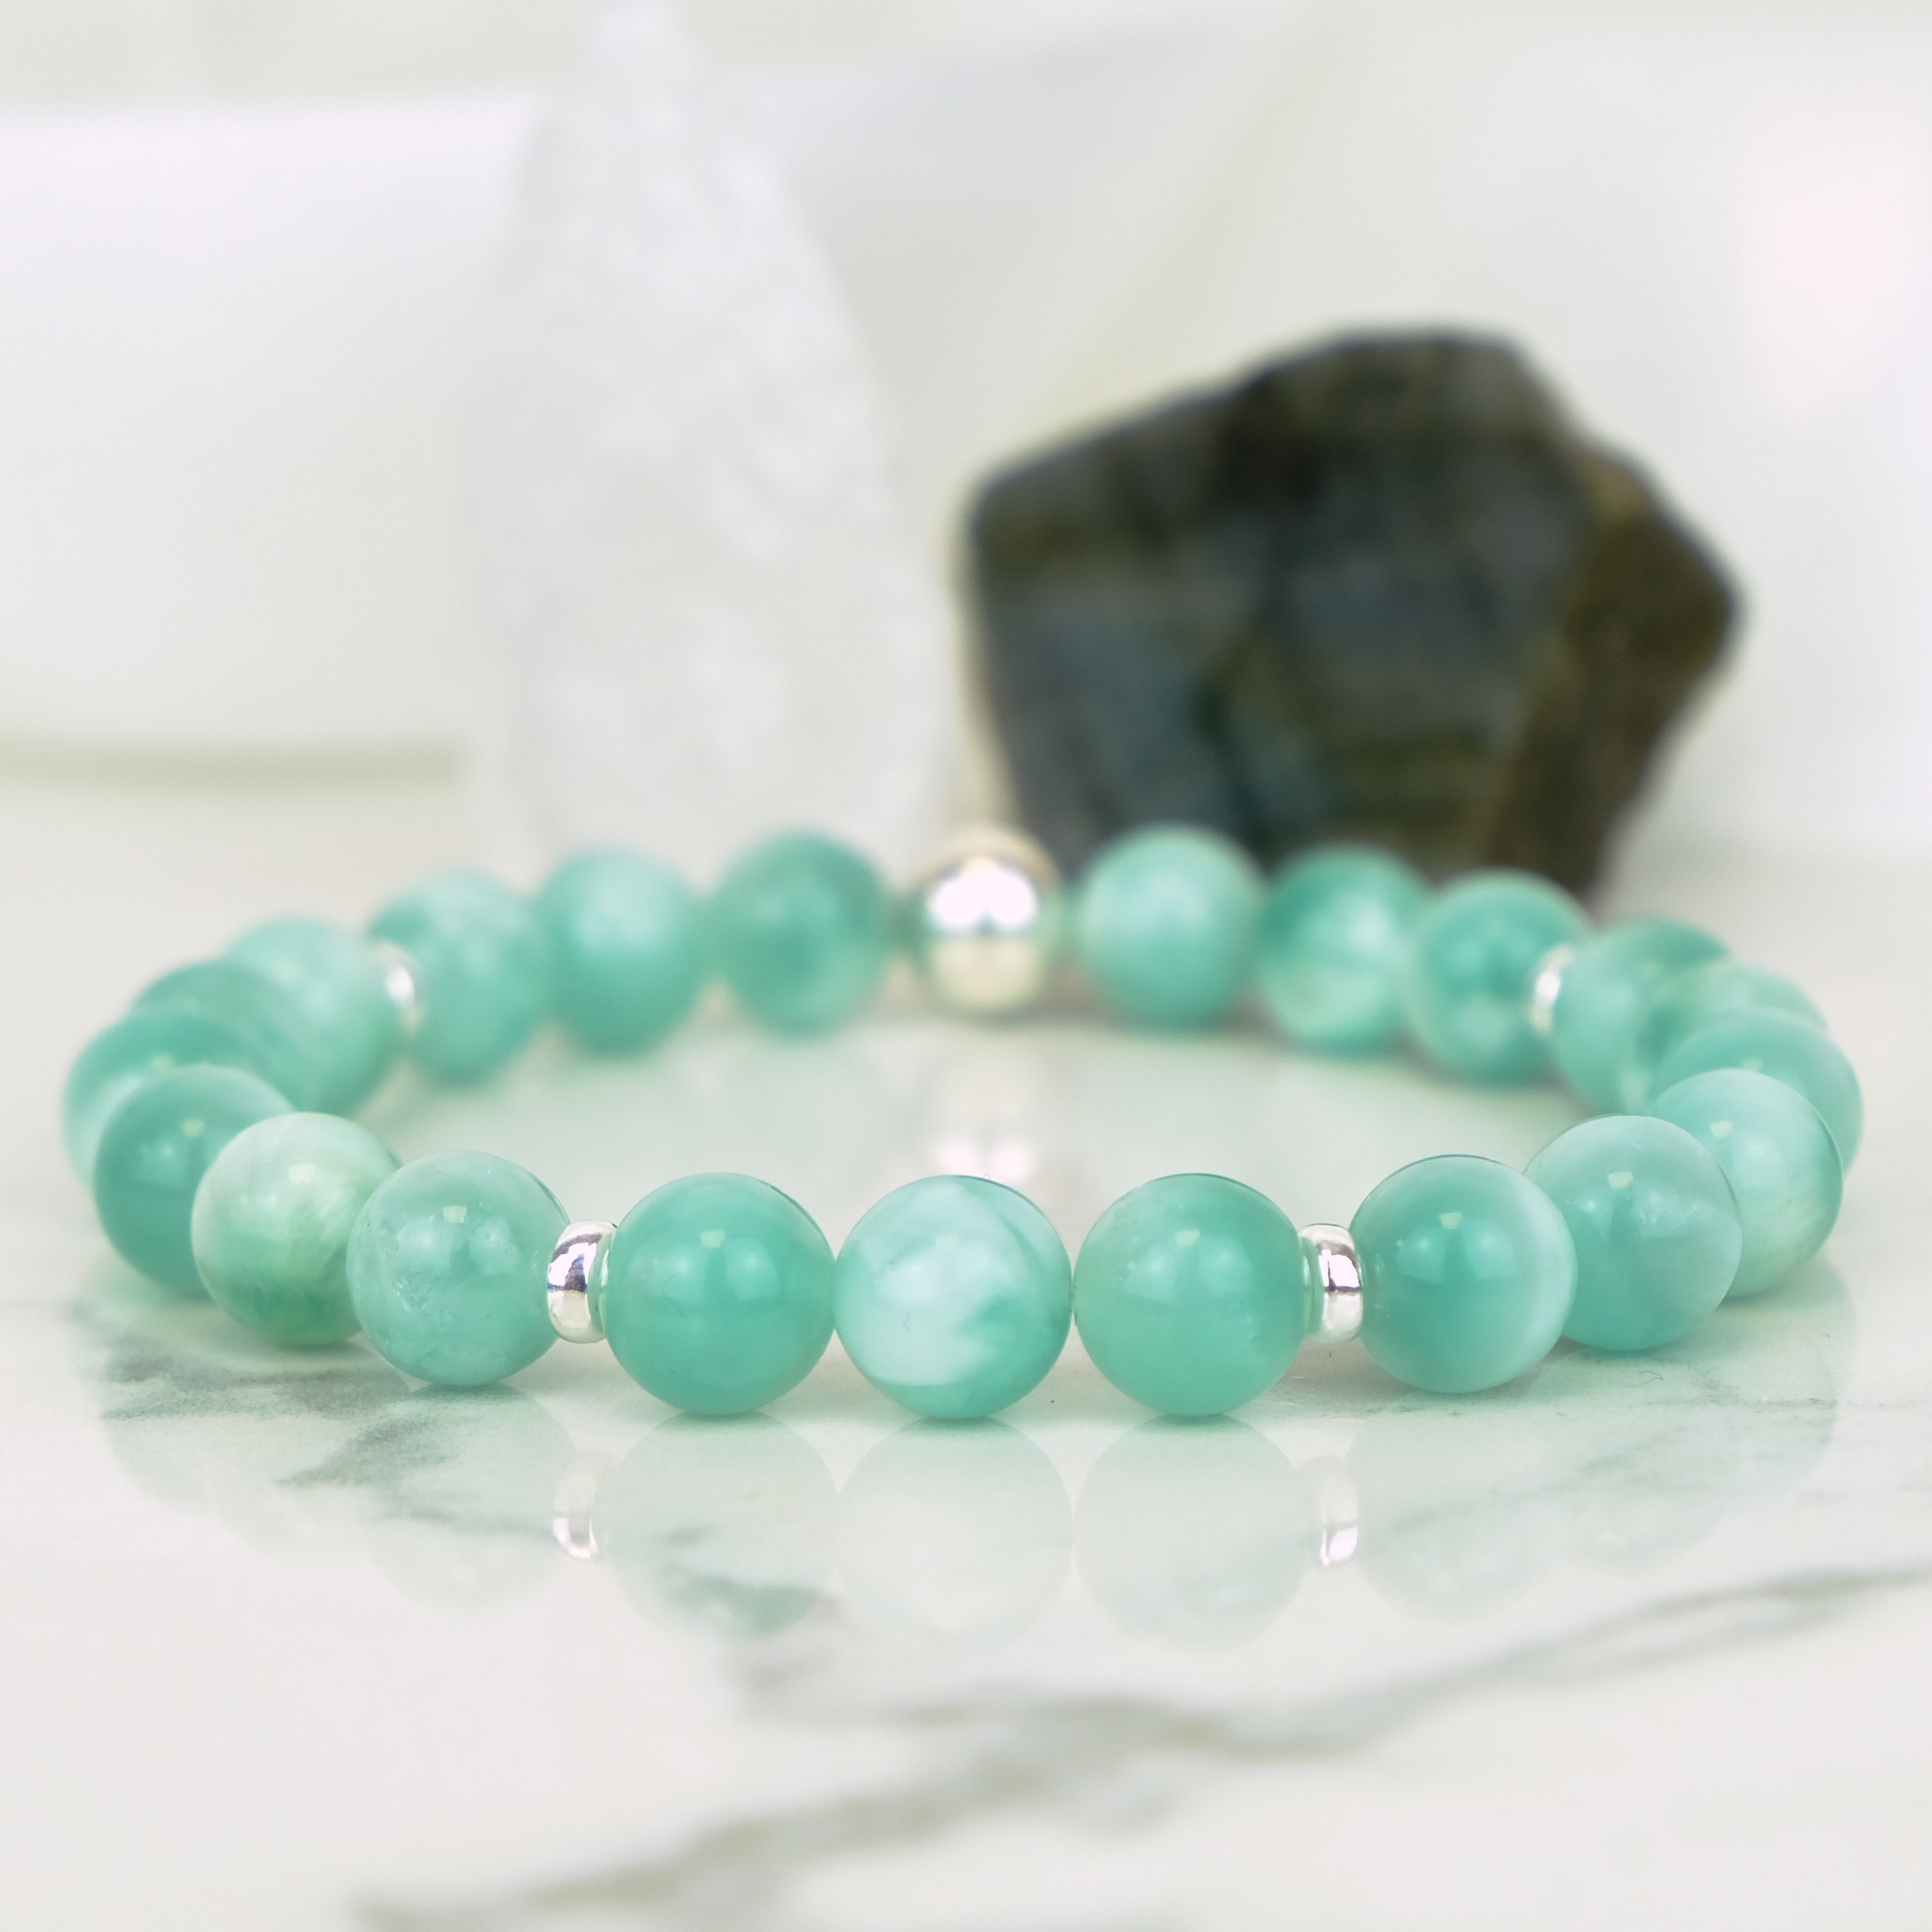 Green Moonstone gemstone bracelet with silver accents